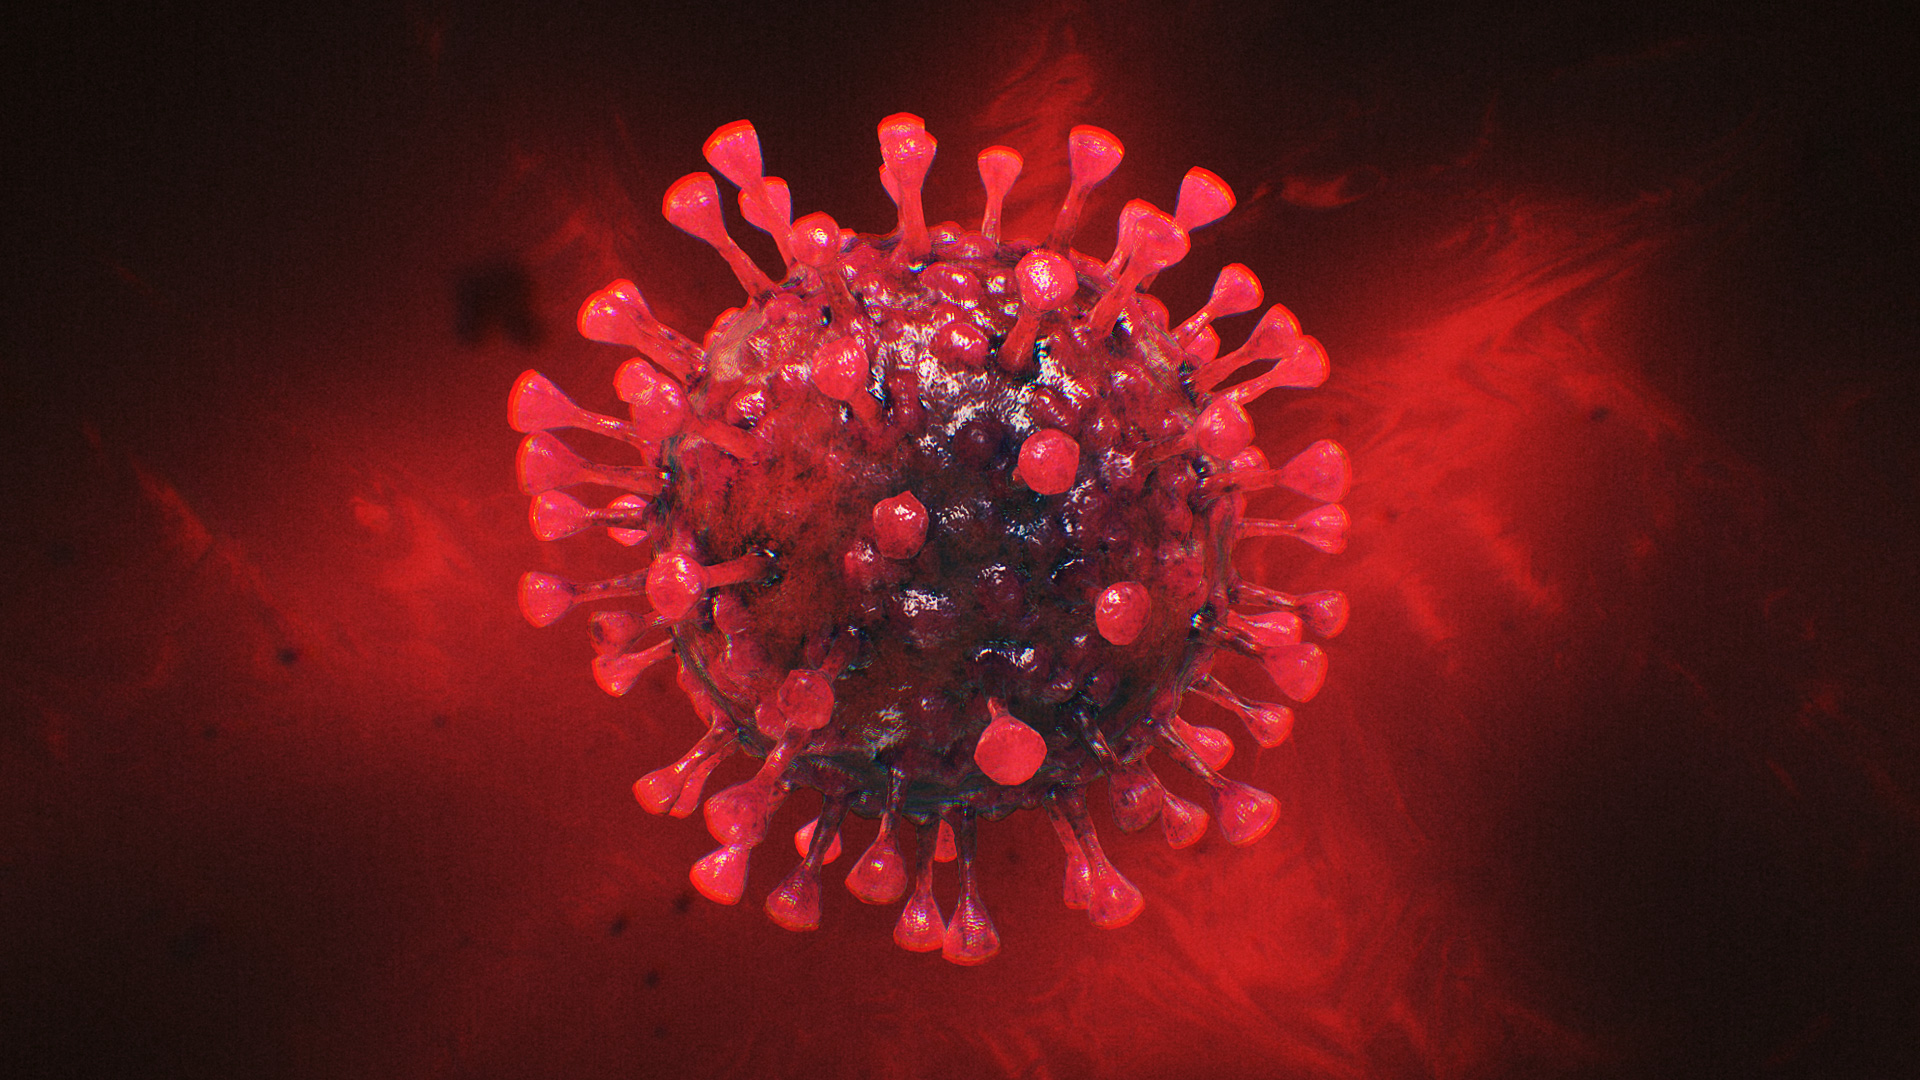 Download Coronavirus Video Effects, Overlays and Backgrounds ...